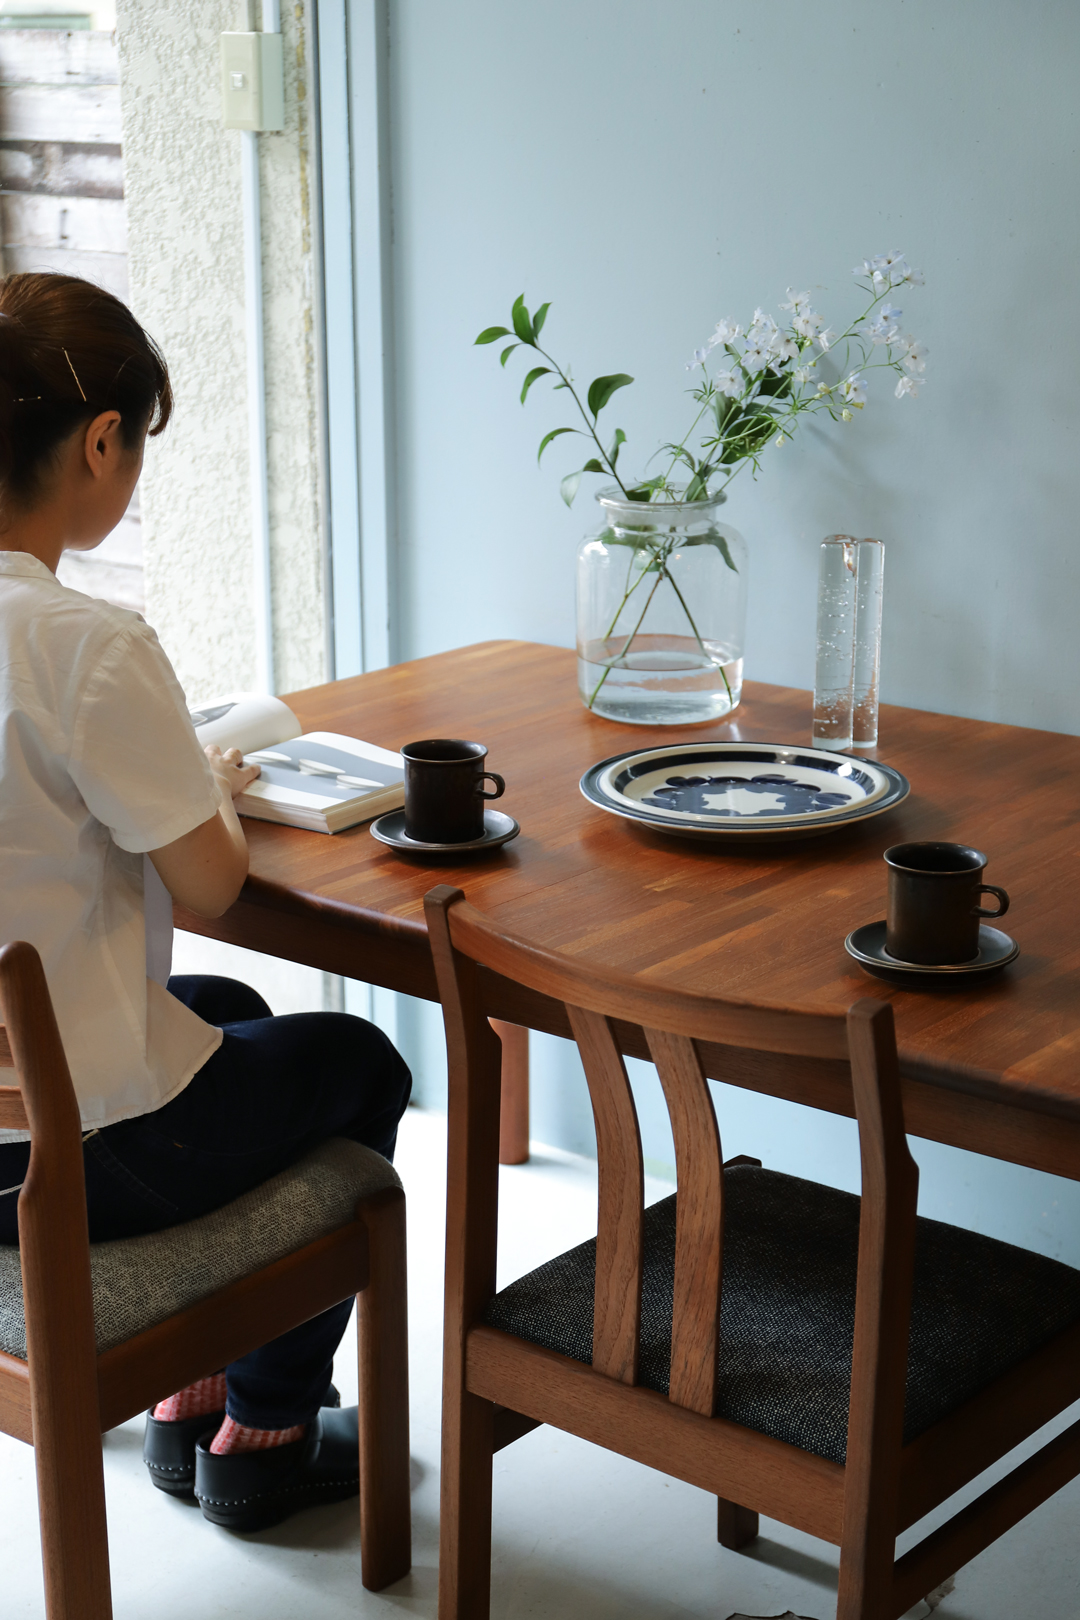 Vintage Teakwood Extension Dining Table/ヴィンテージ エクステンション ダイニングテーブル チーク材 伸長 北欧モダン